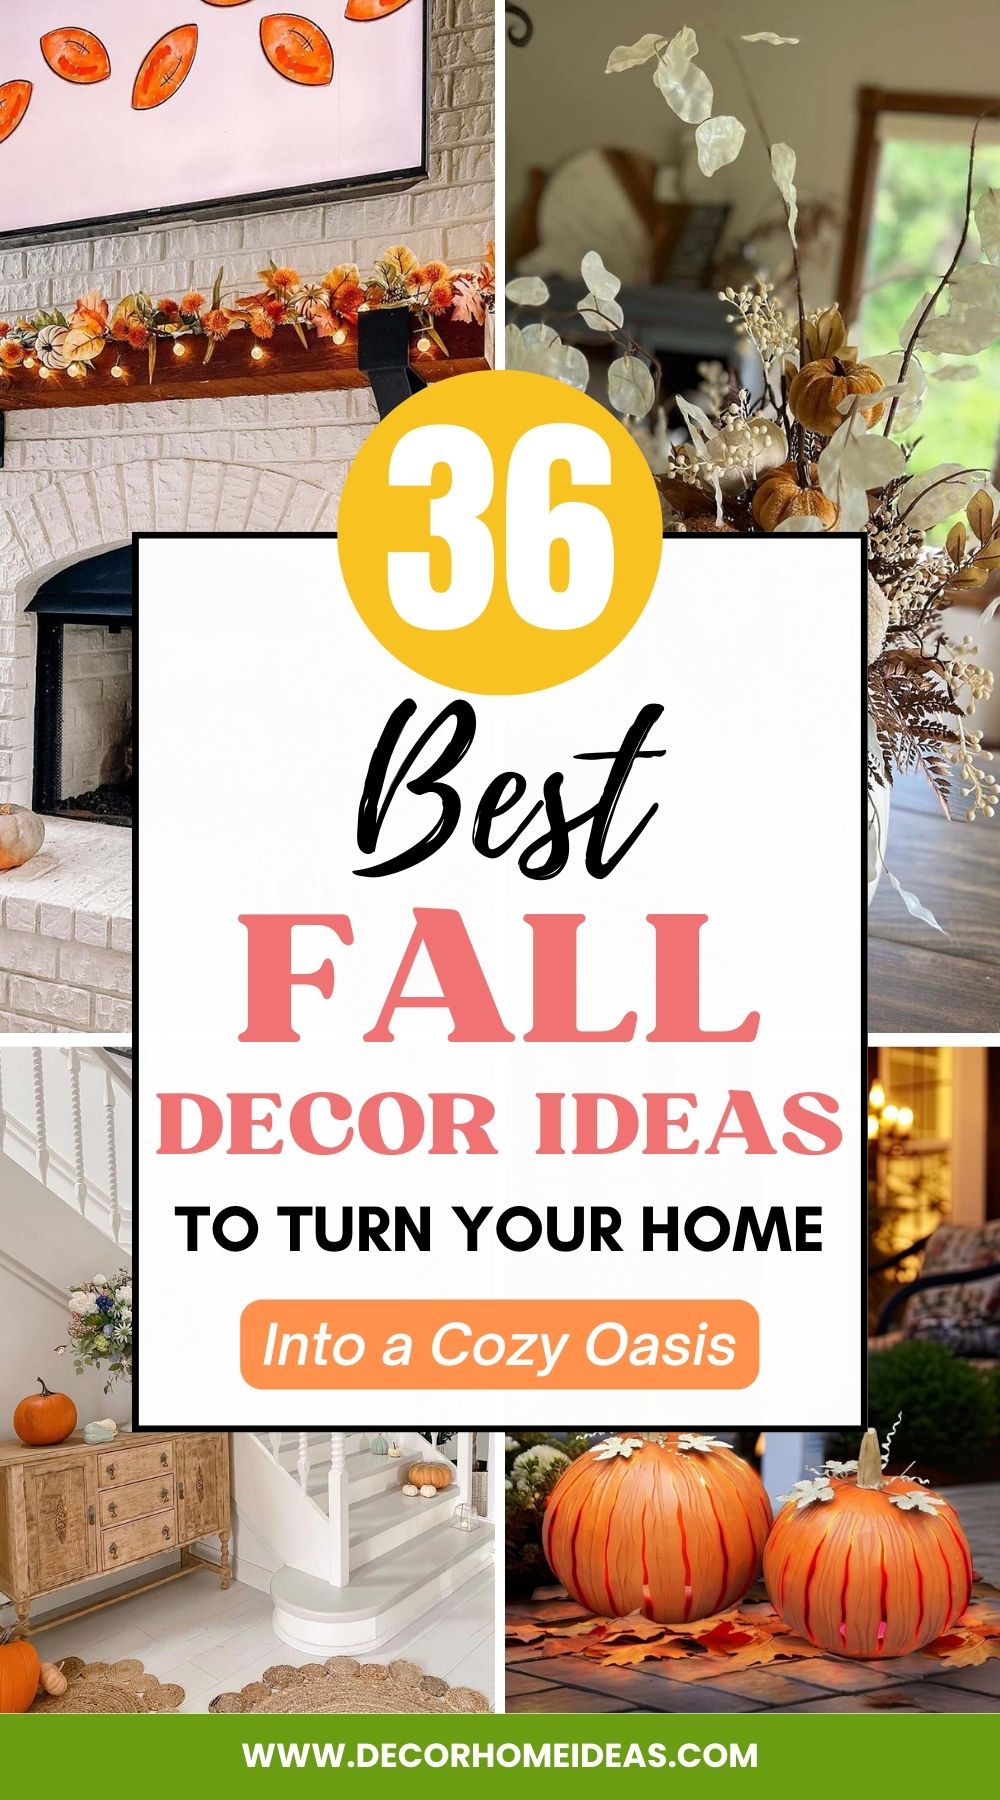 Unveil 36 mesmerizing fall decor ideas perfect for every nook of your home. Step into autumn elegance and turn your dwelling into a seasonal sanctuary